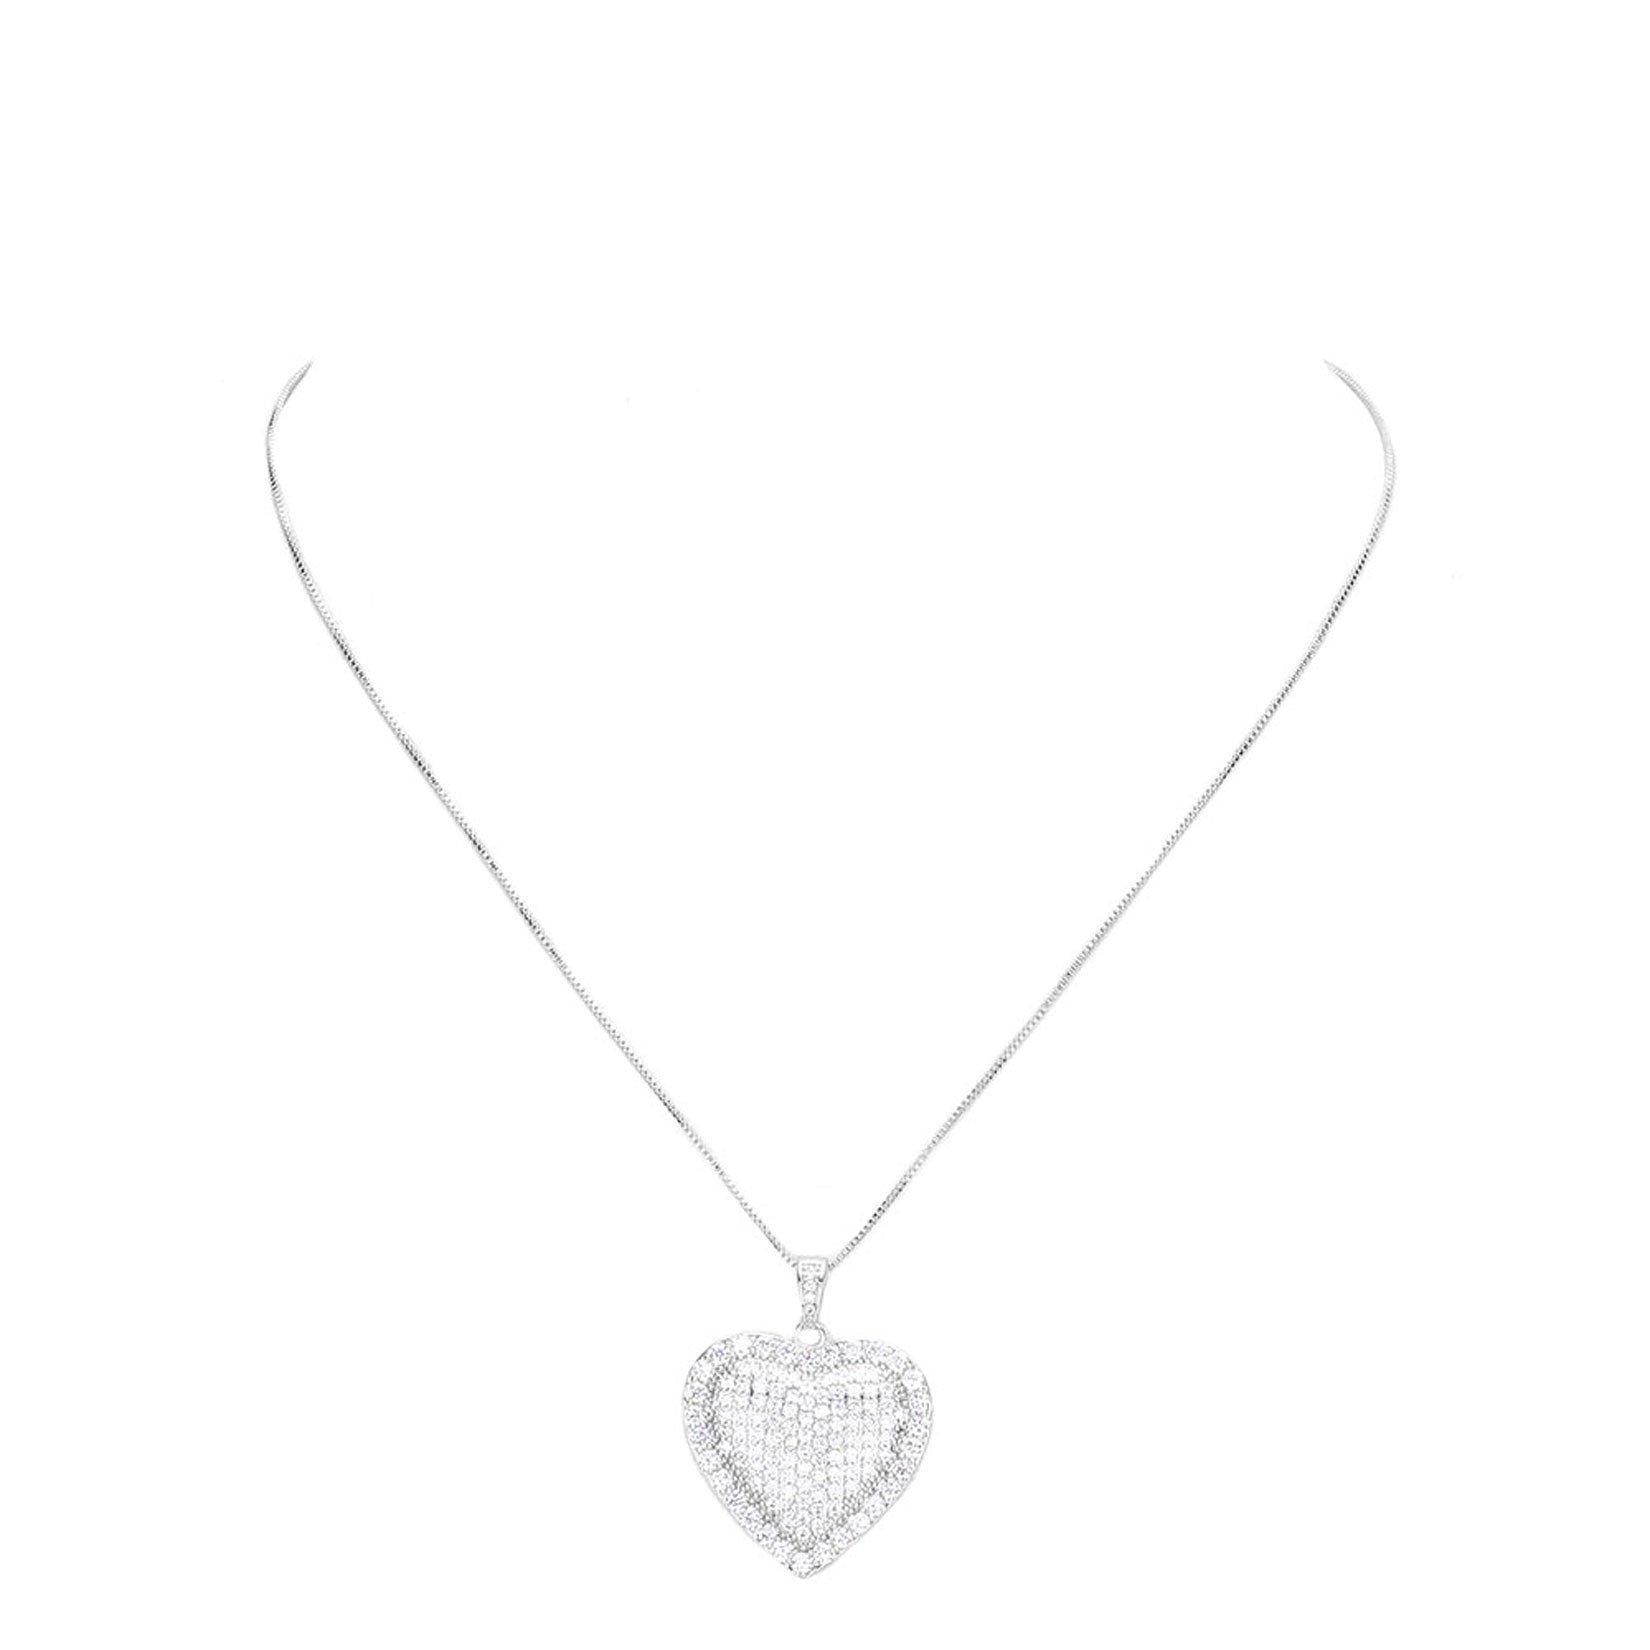 Rhodium Stylish Cubic Zirconia CZ Heart Pendant Necklace. Beautifully crafted design adds a gorgeous glow to any outfit. Jewelry that fits your lifestyle! Perfect Birthday Gift, Anniversary Gift, Mother's Day Gift, Anniversary Gift, Graduation Gift, Prom Jewelry, Just Because Gift, Thank you Gift.